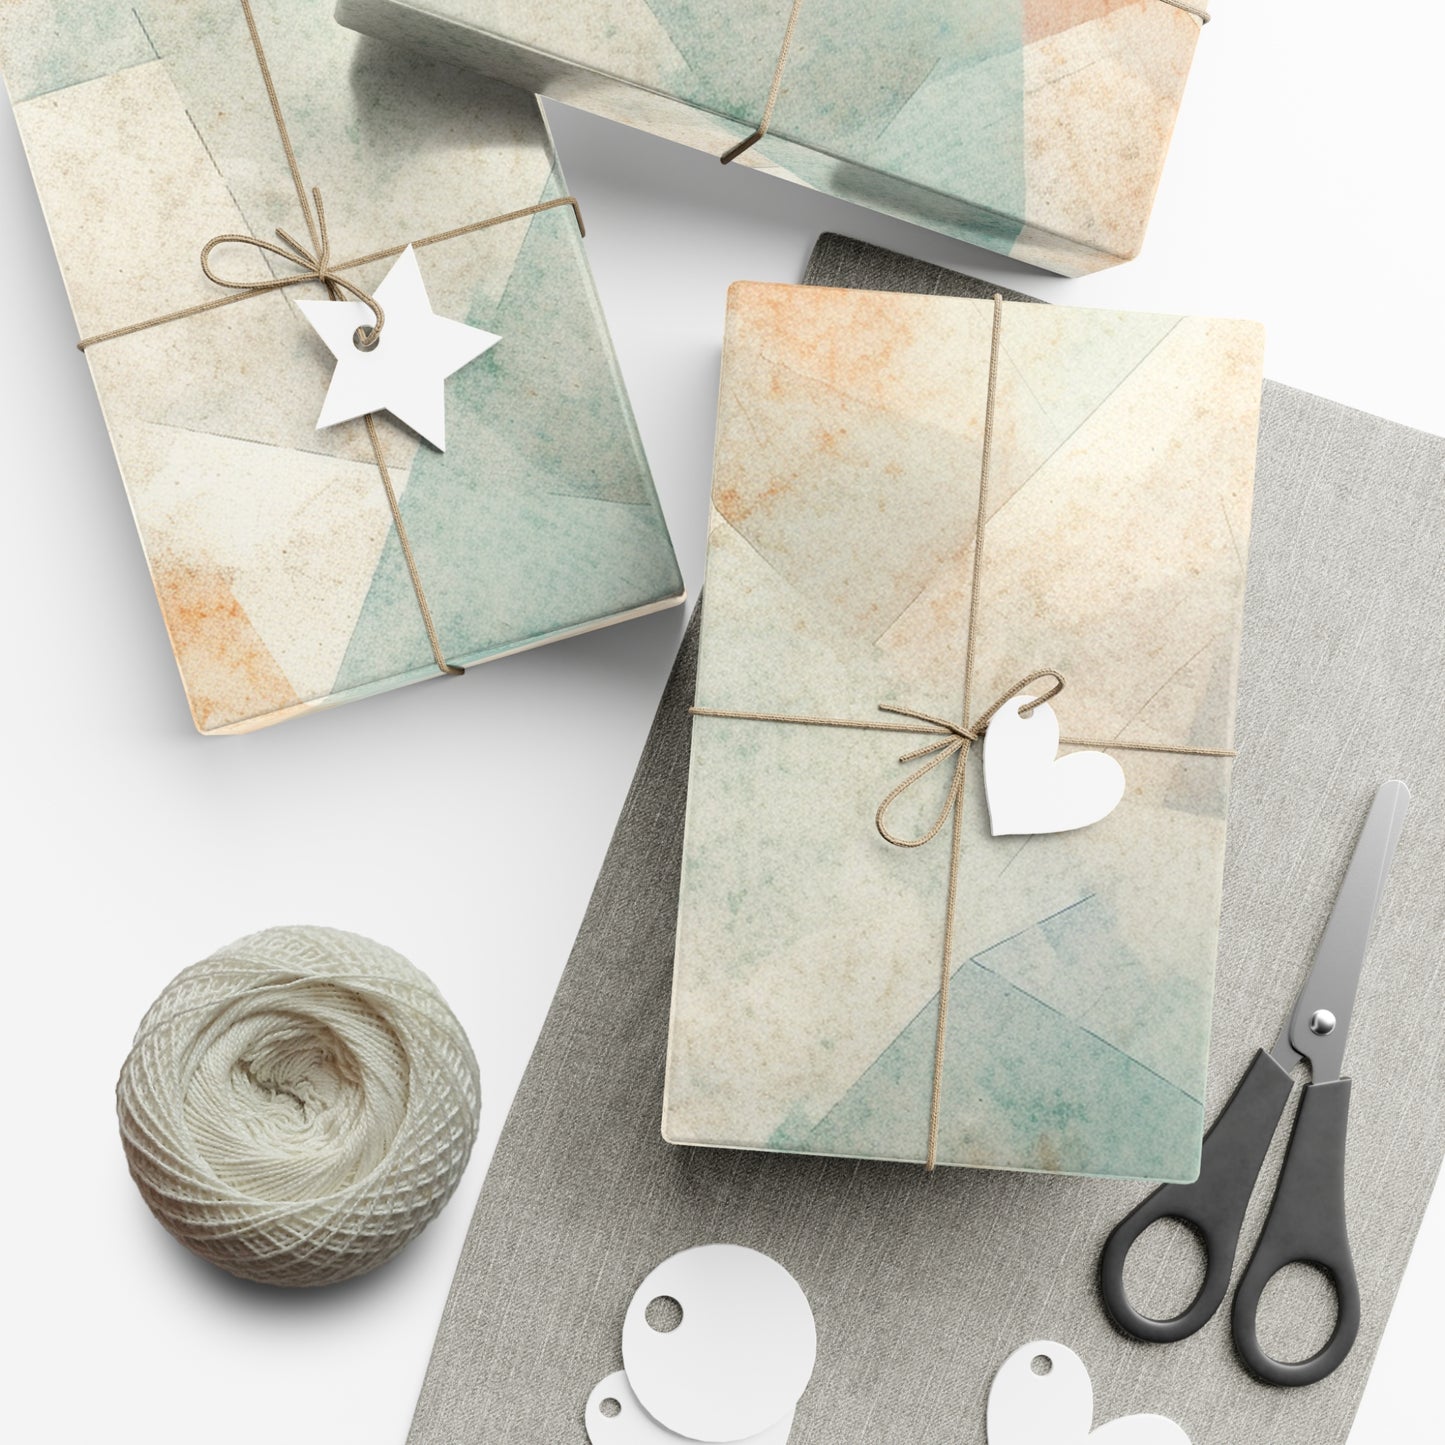 Neduz Gift Wrap Paper - Satin & Matte Finishes - USA Made, Eco-Friendly Inks